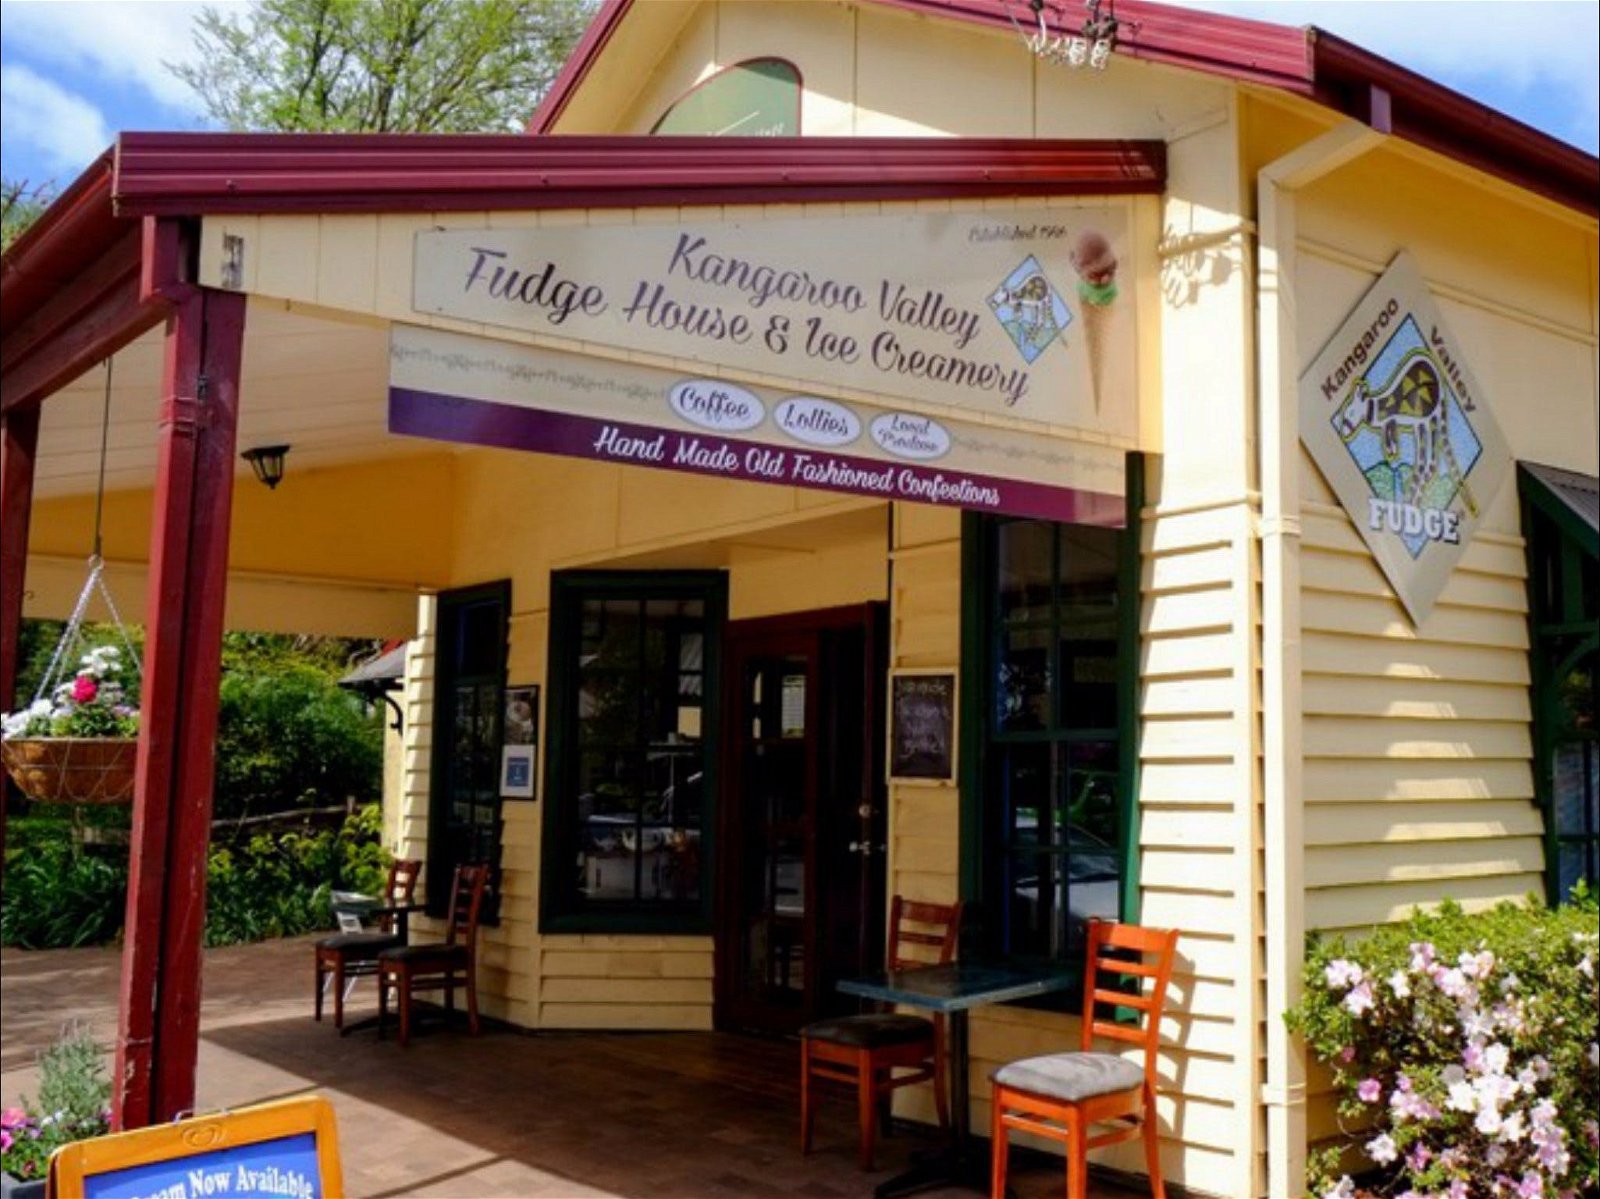 Kangaroo Valley Fudge House and Ice Creamery - Food Delivery Shop